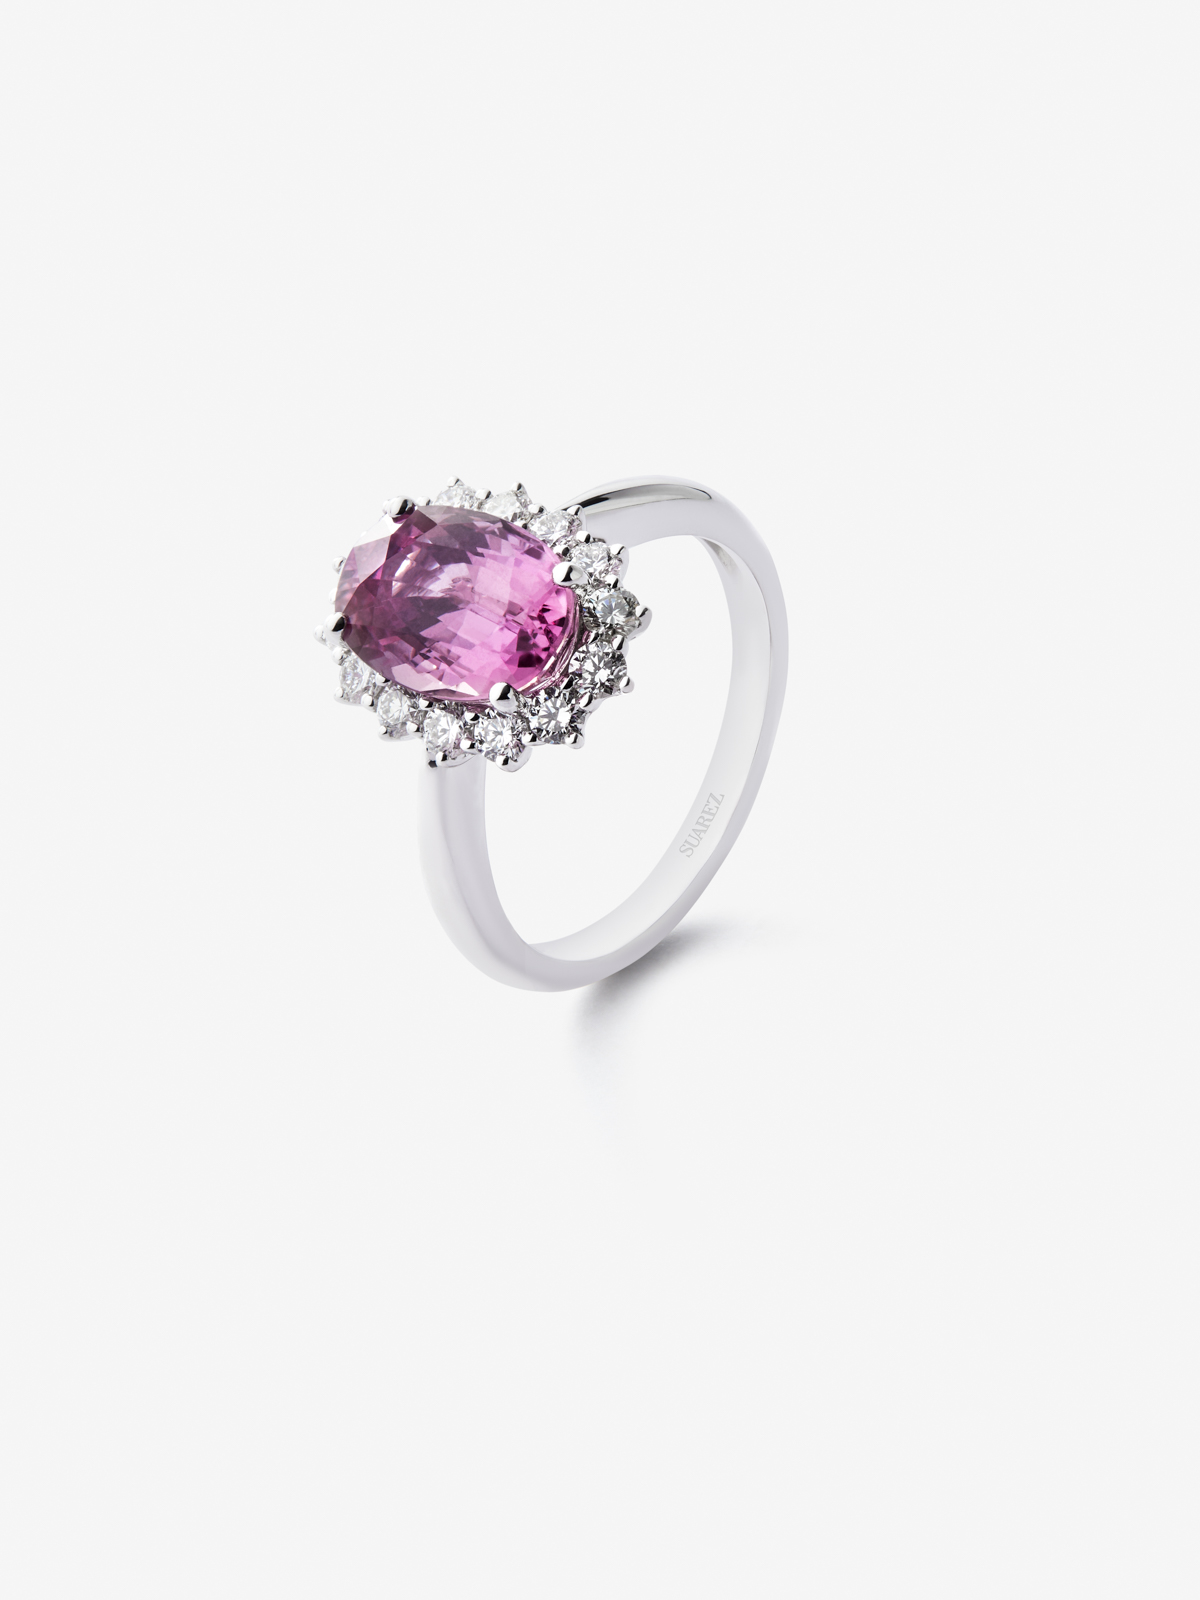 18K white gold ring with 3.4 ct oval-cut intense pink sapphire and 0.53 ct brilliant-cut diamonds